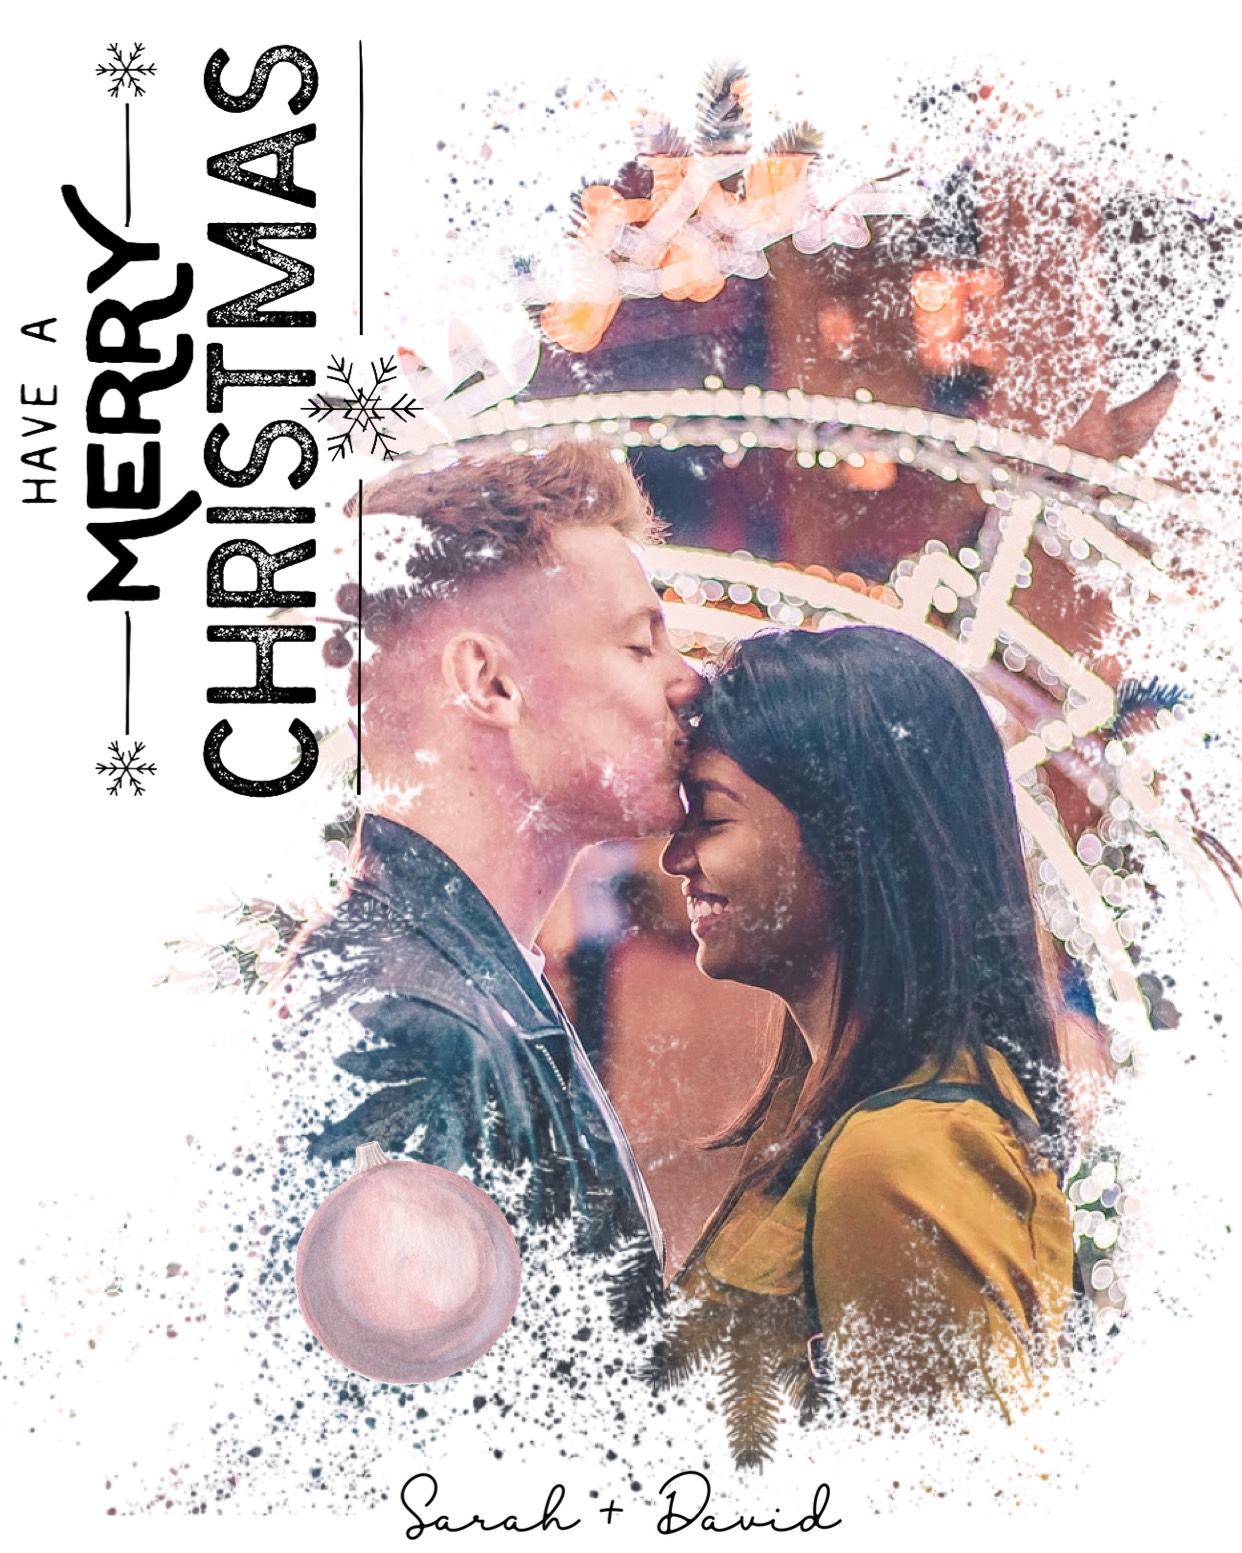 A Man And A Woman Kissing In Front Of A Ferris Wheel Merry Christmas Template